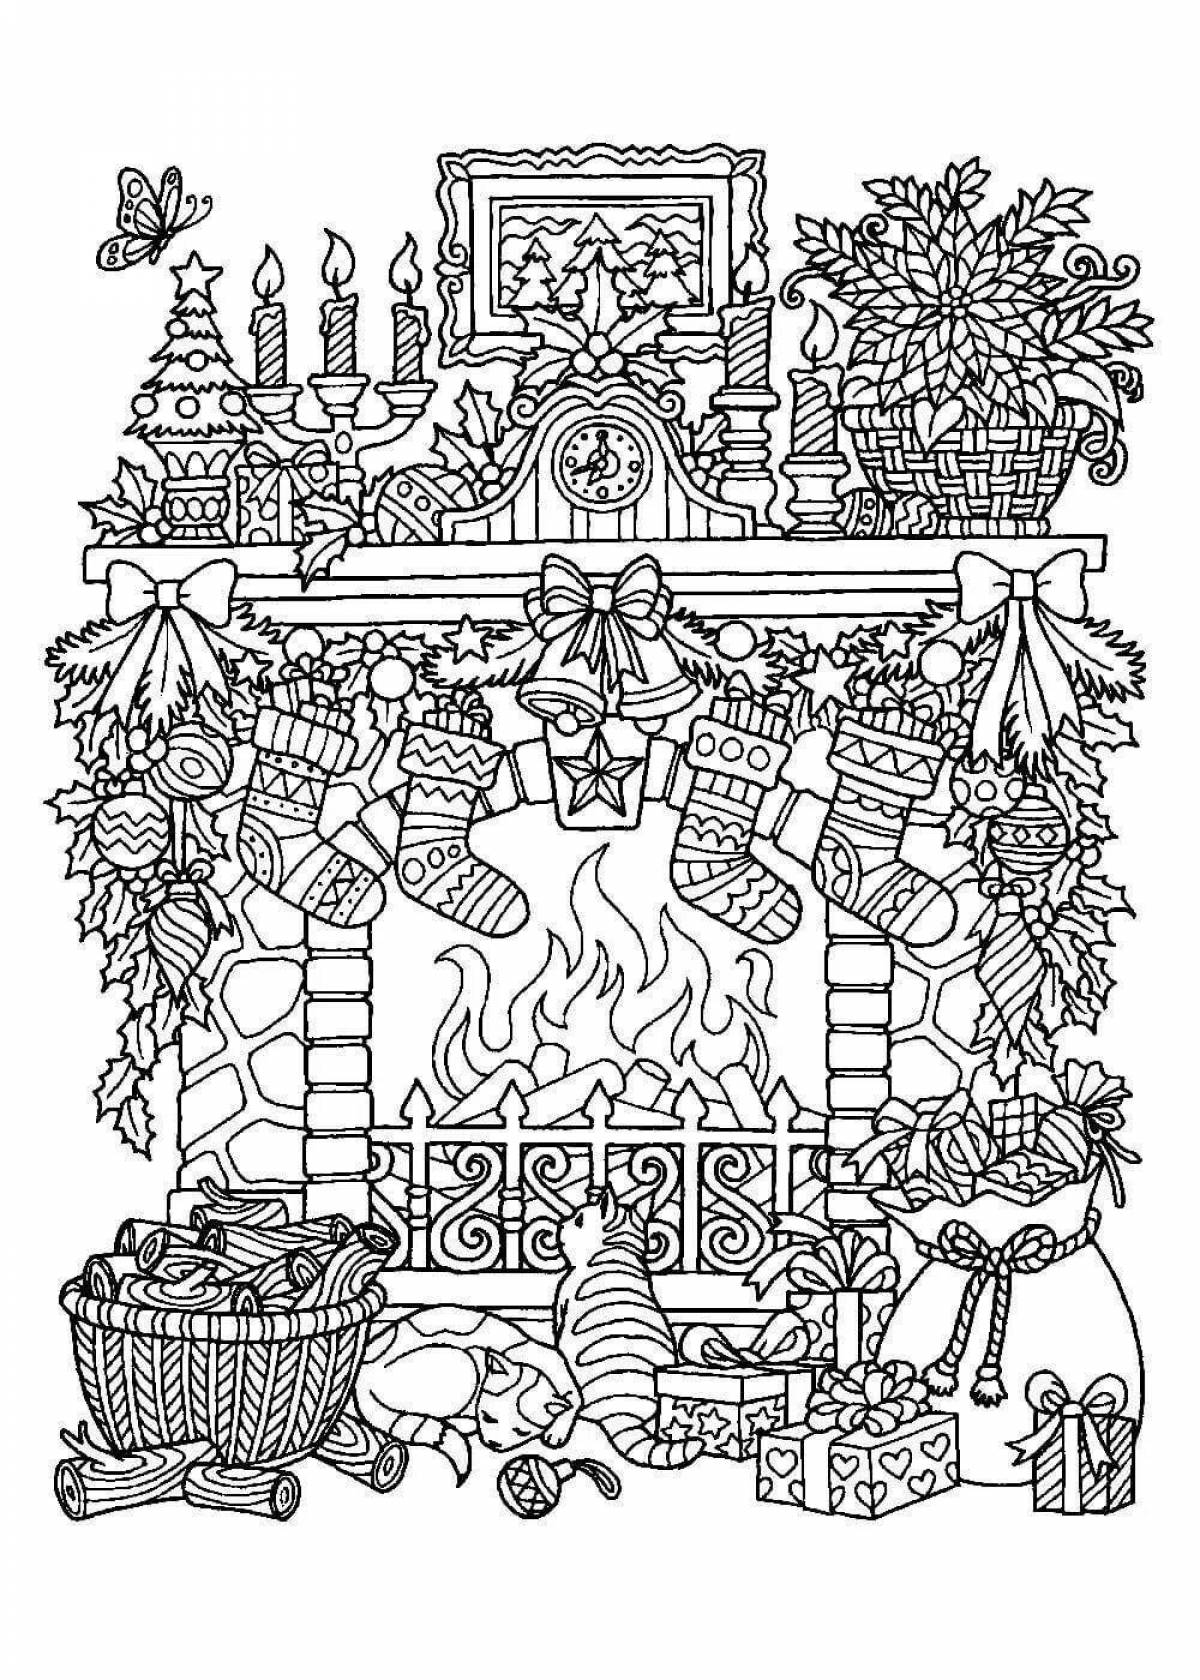 Complex Christmas coloring book for adults